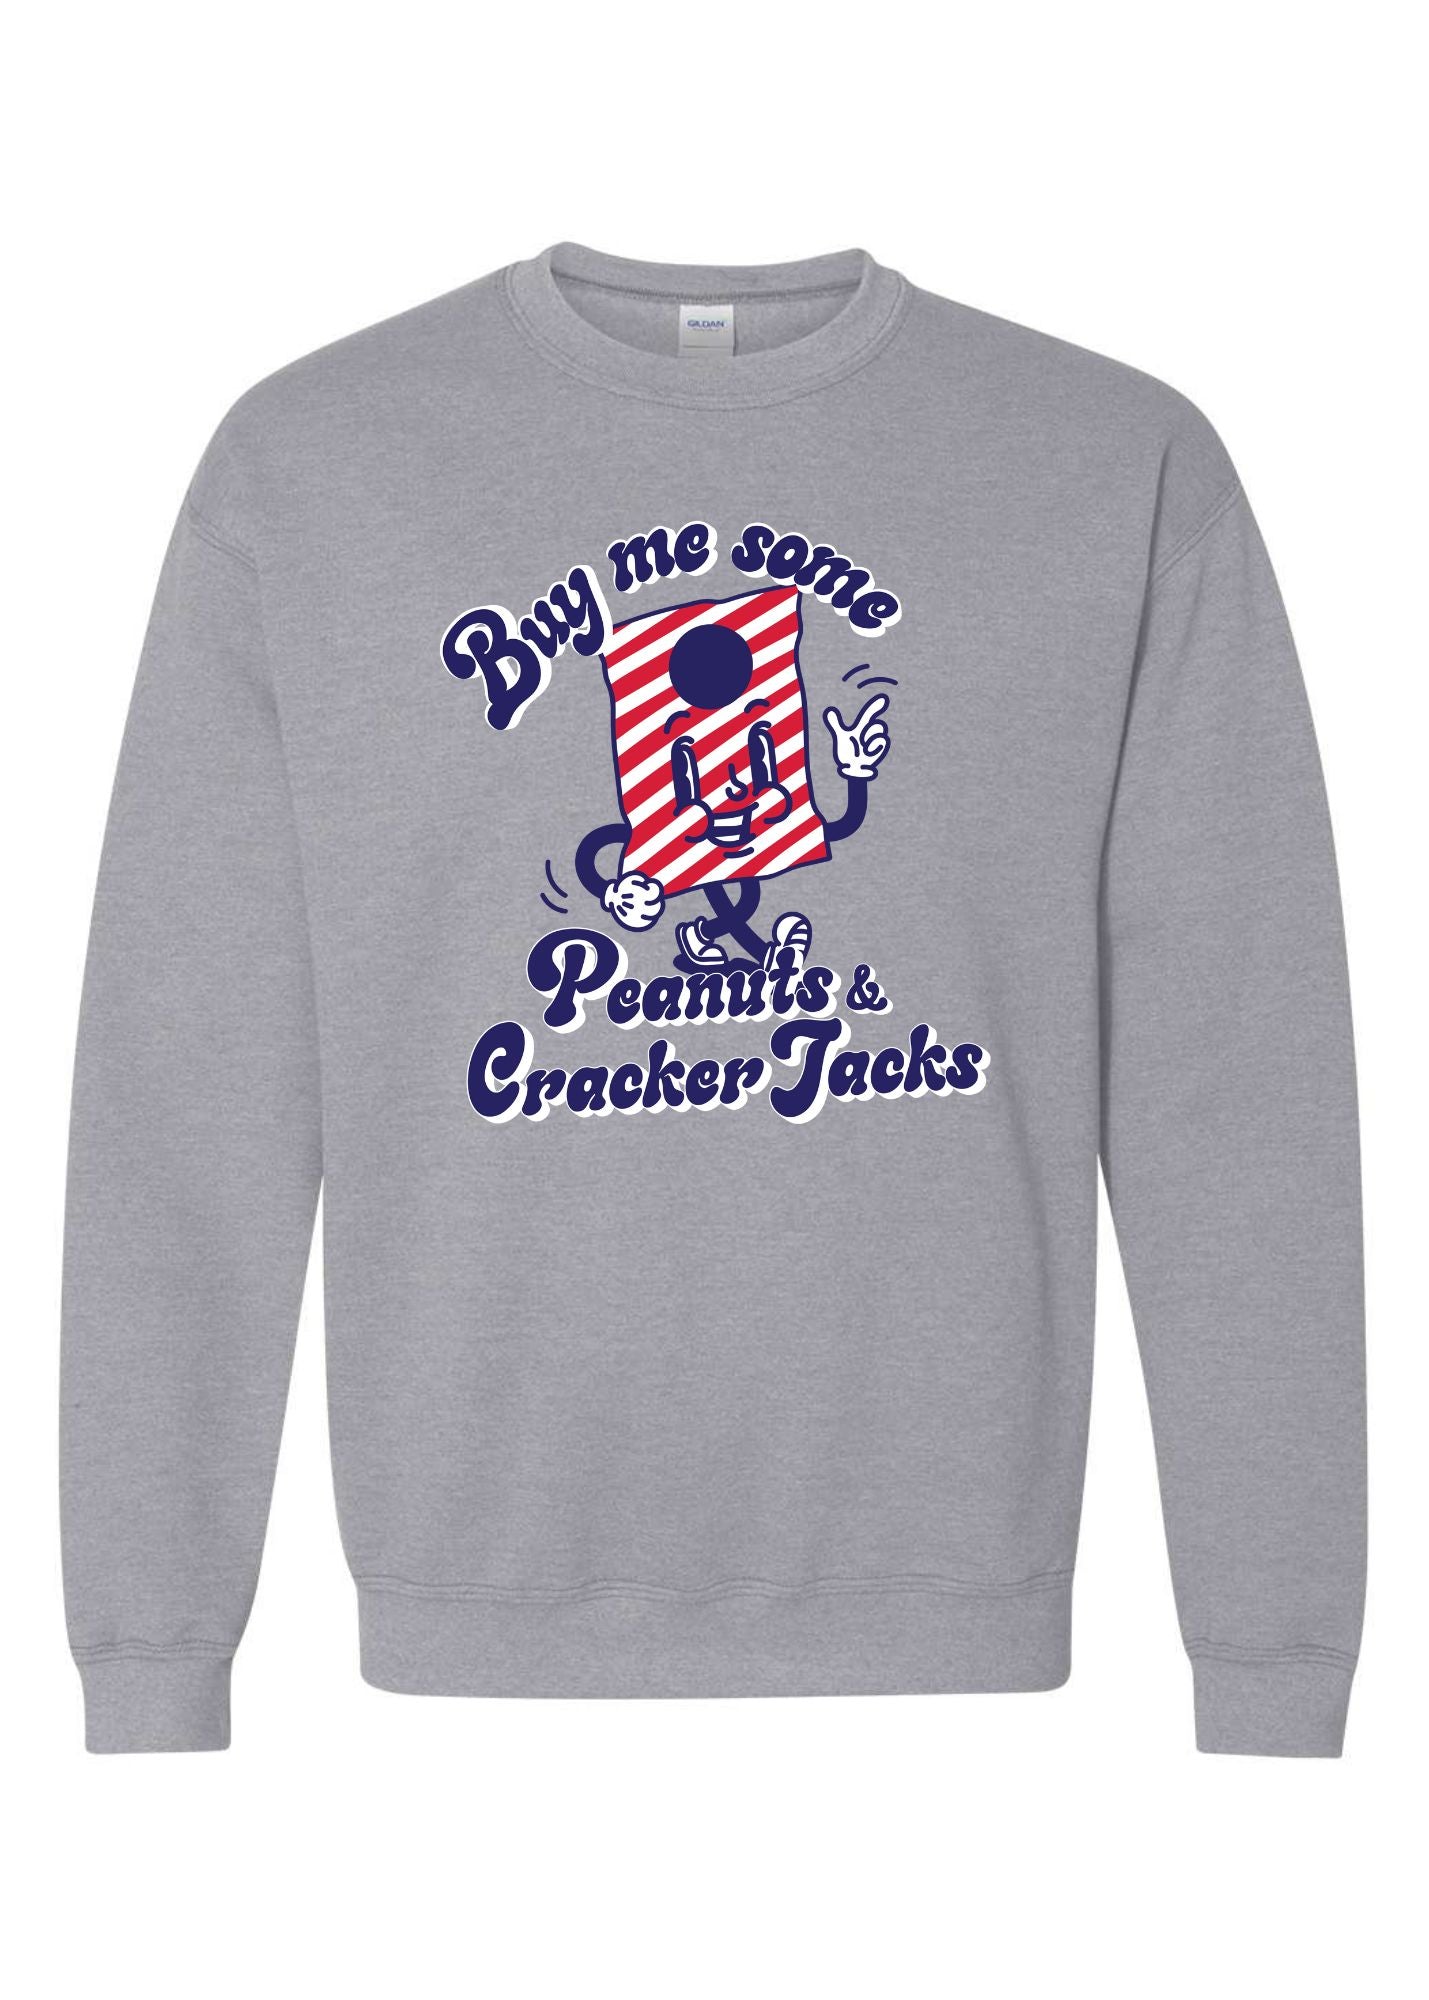 Peanuts + Cracker Jacks | Pullover | Adult-Sister Shirts-Sister Shirts, Cute & Custom Tees for Mama & Littles in Trussville, Alabama.